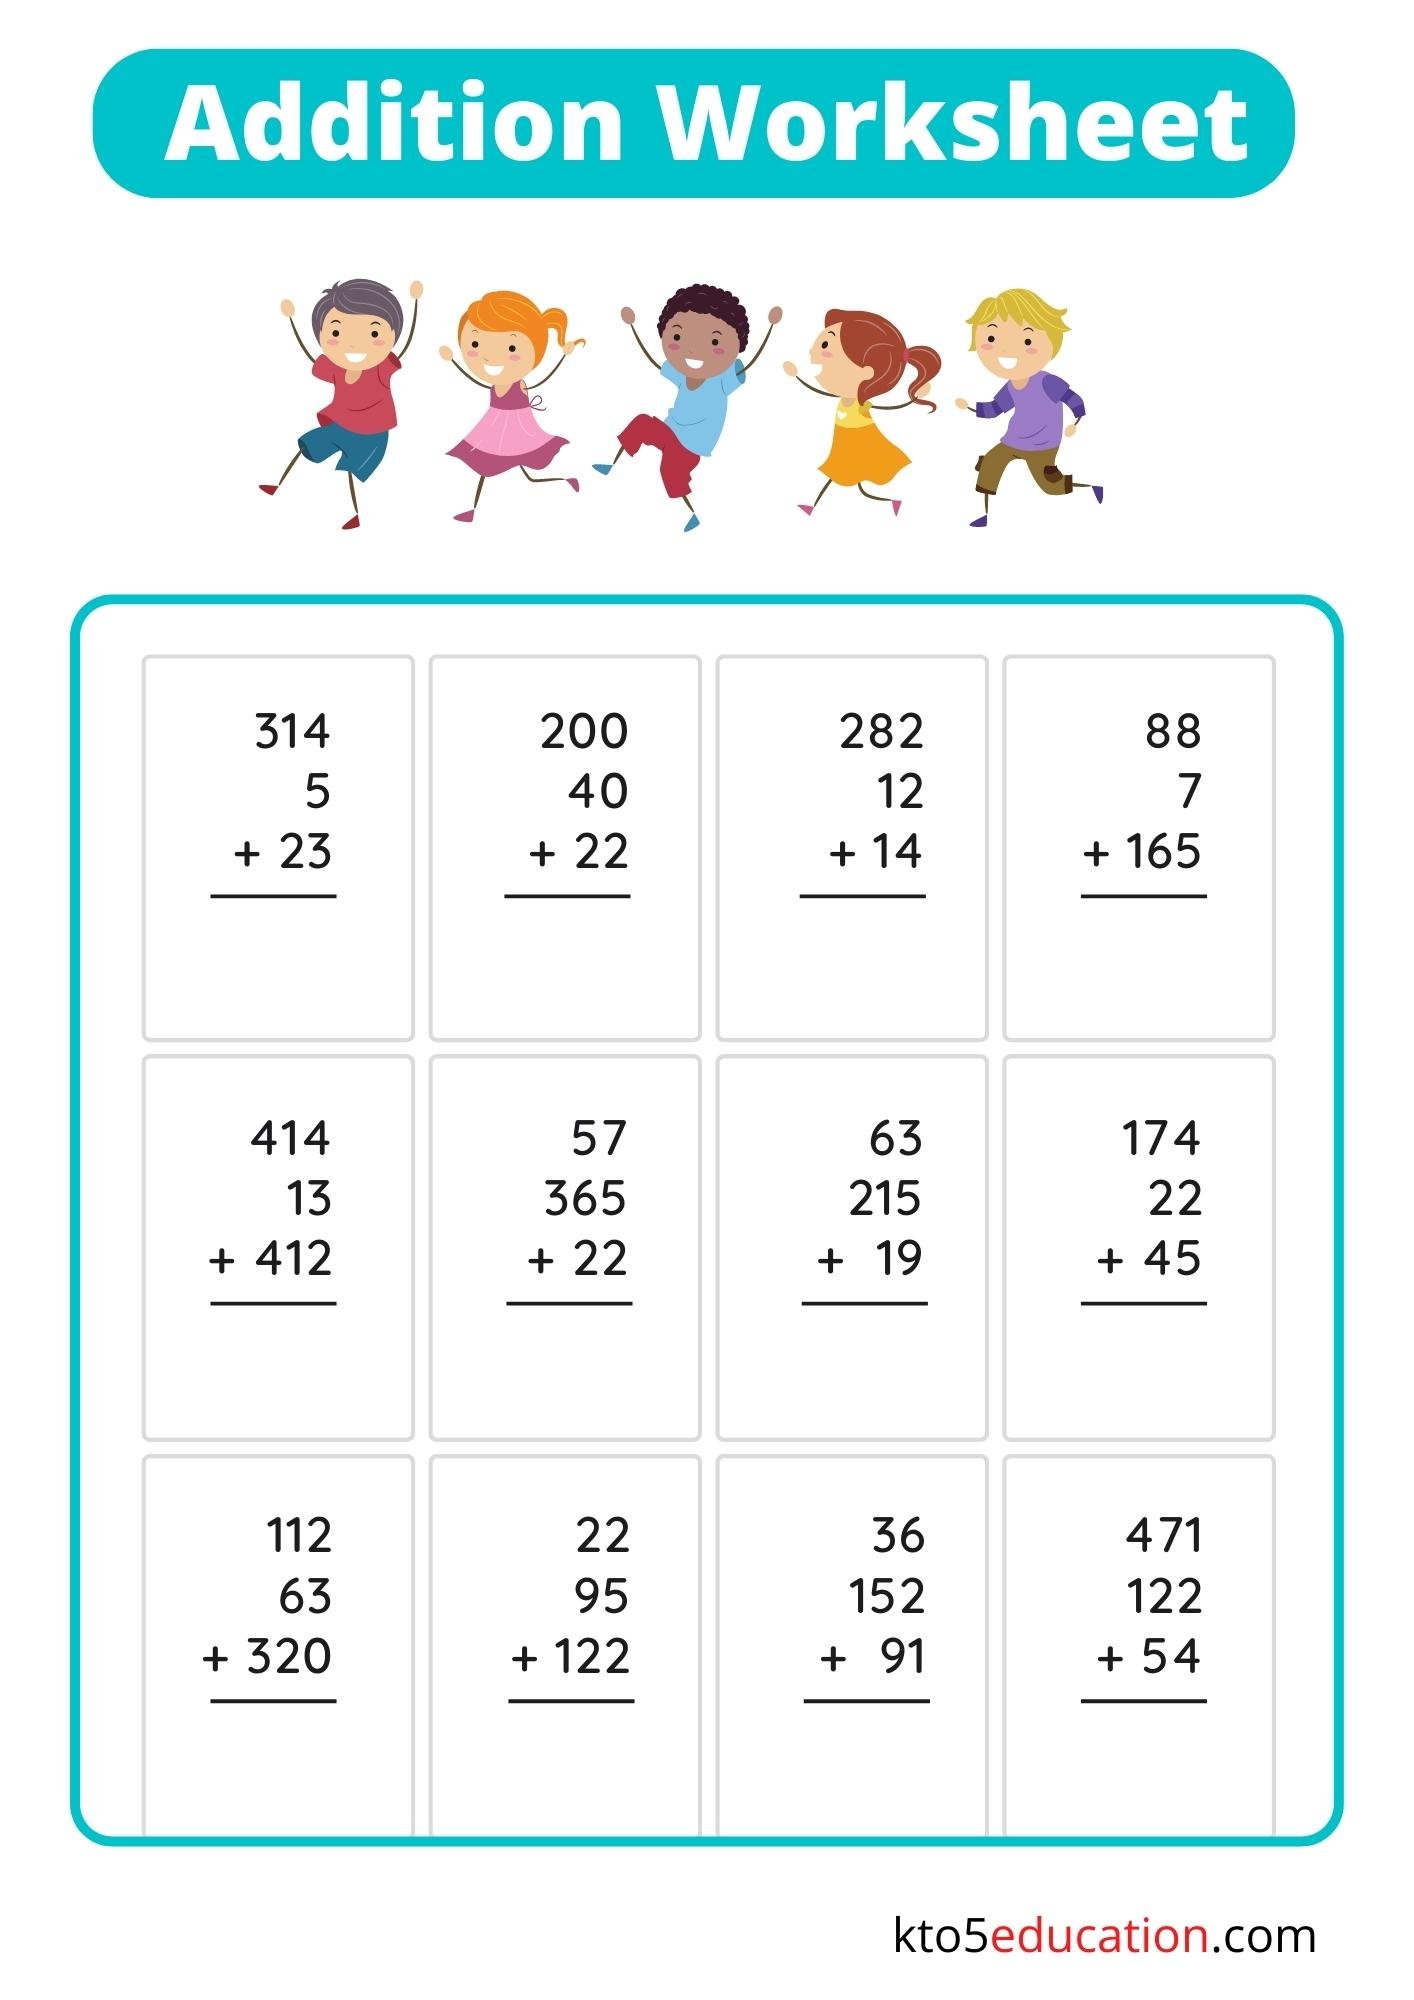 Free Addition Fact Practice Worksheet Kto5Education